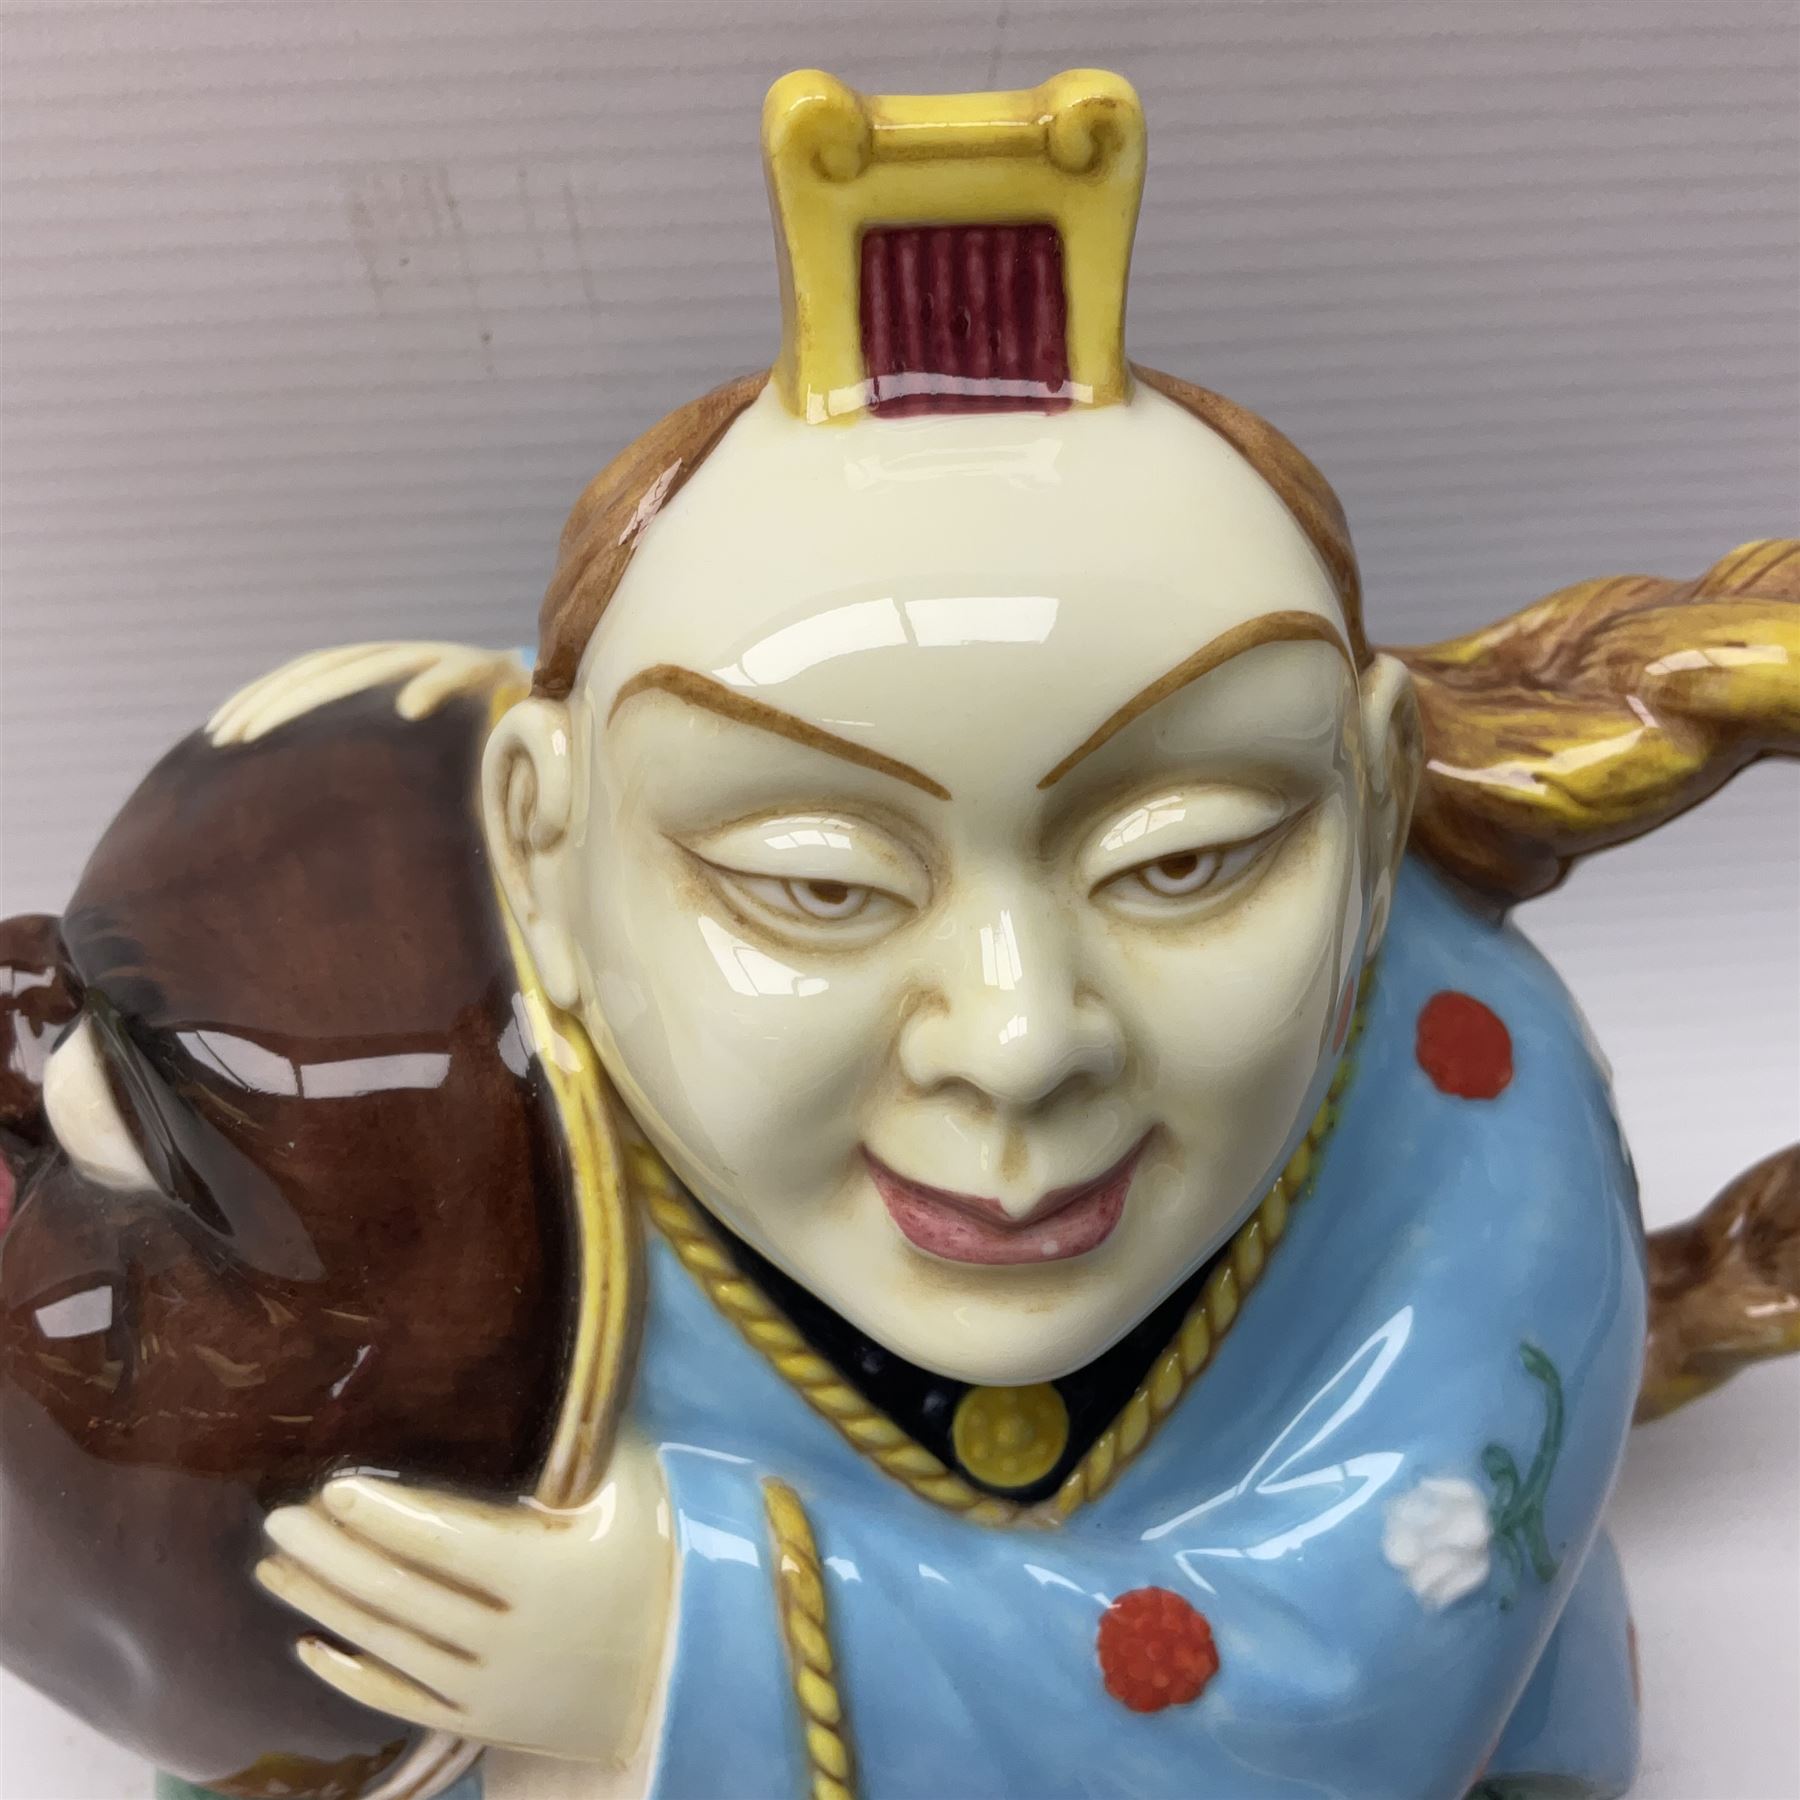 Minton Archive collection chinaman teapot - Image 5 of 12